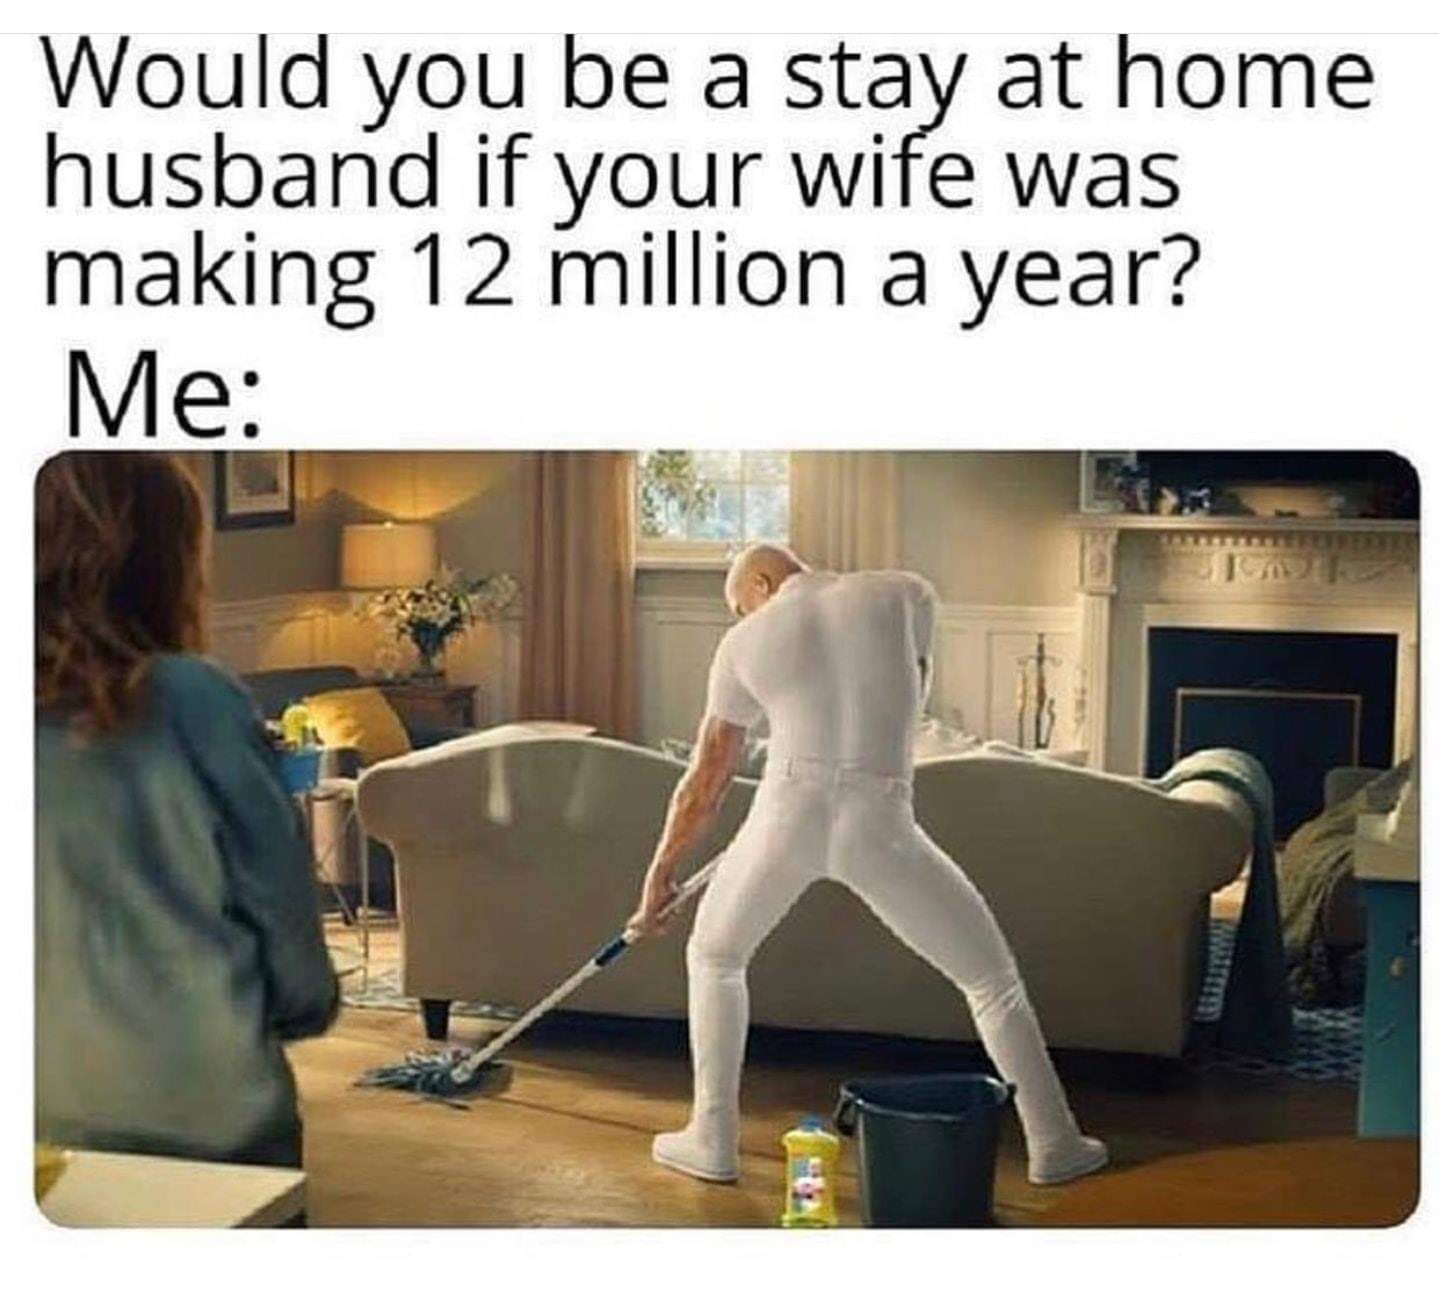 would you be a stay at home husband meme - Would you be a stay at home husband if your wife was making 12 million a year? Me